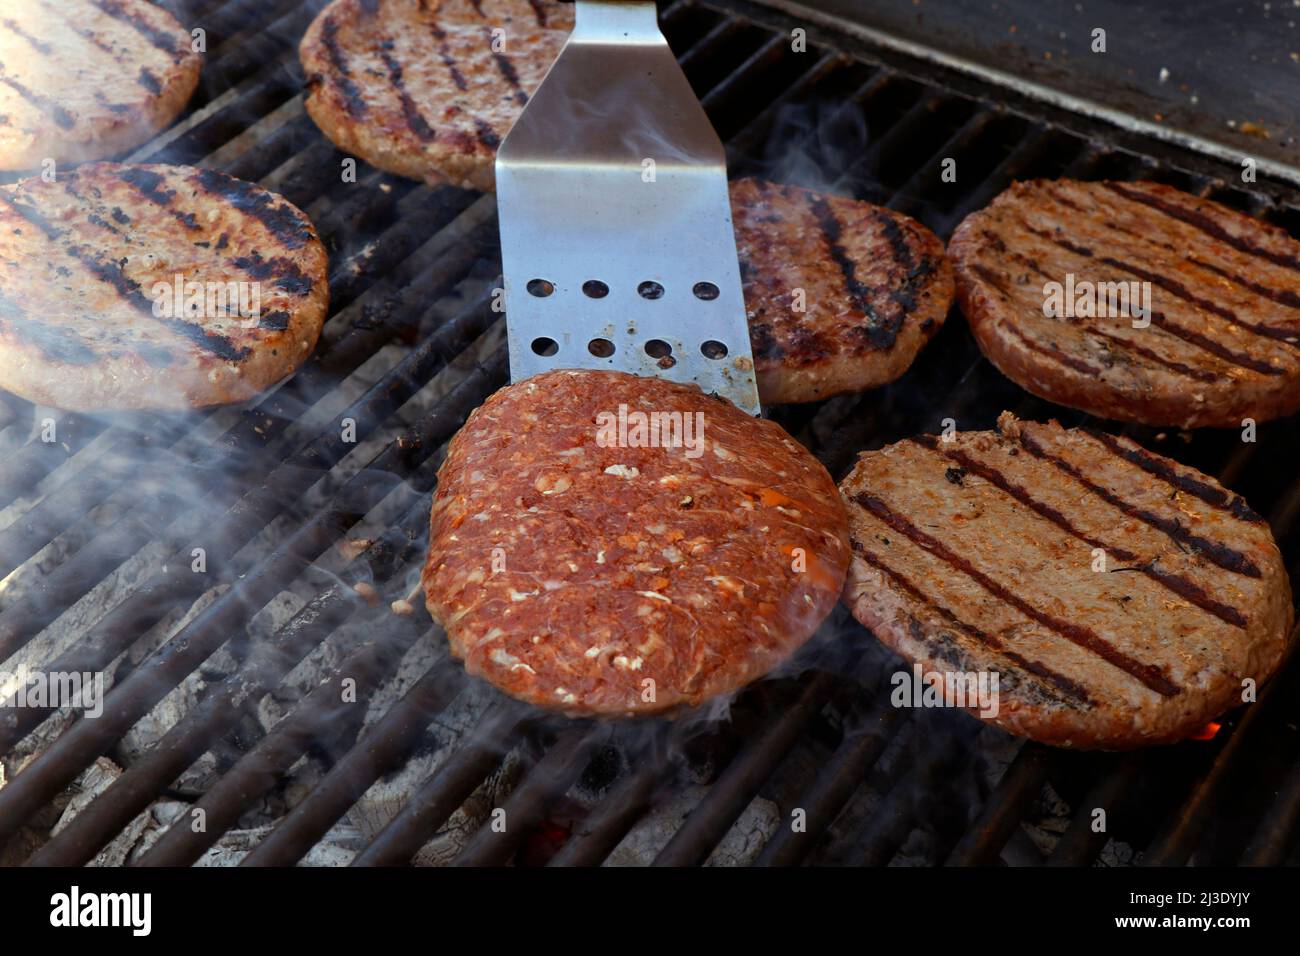 beef meat burger patty on a hot smoky barbeque grill Stock Photo - Alamy